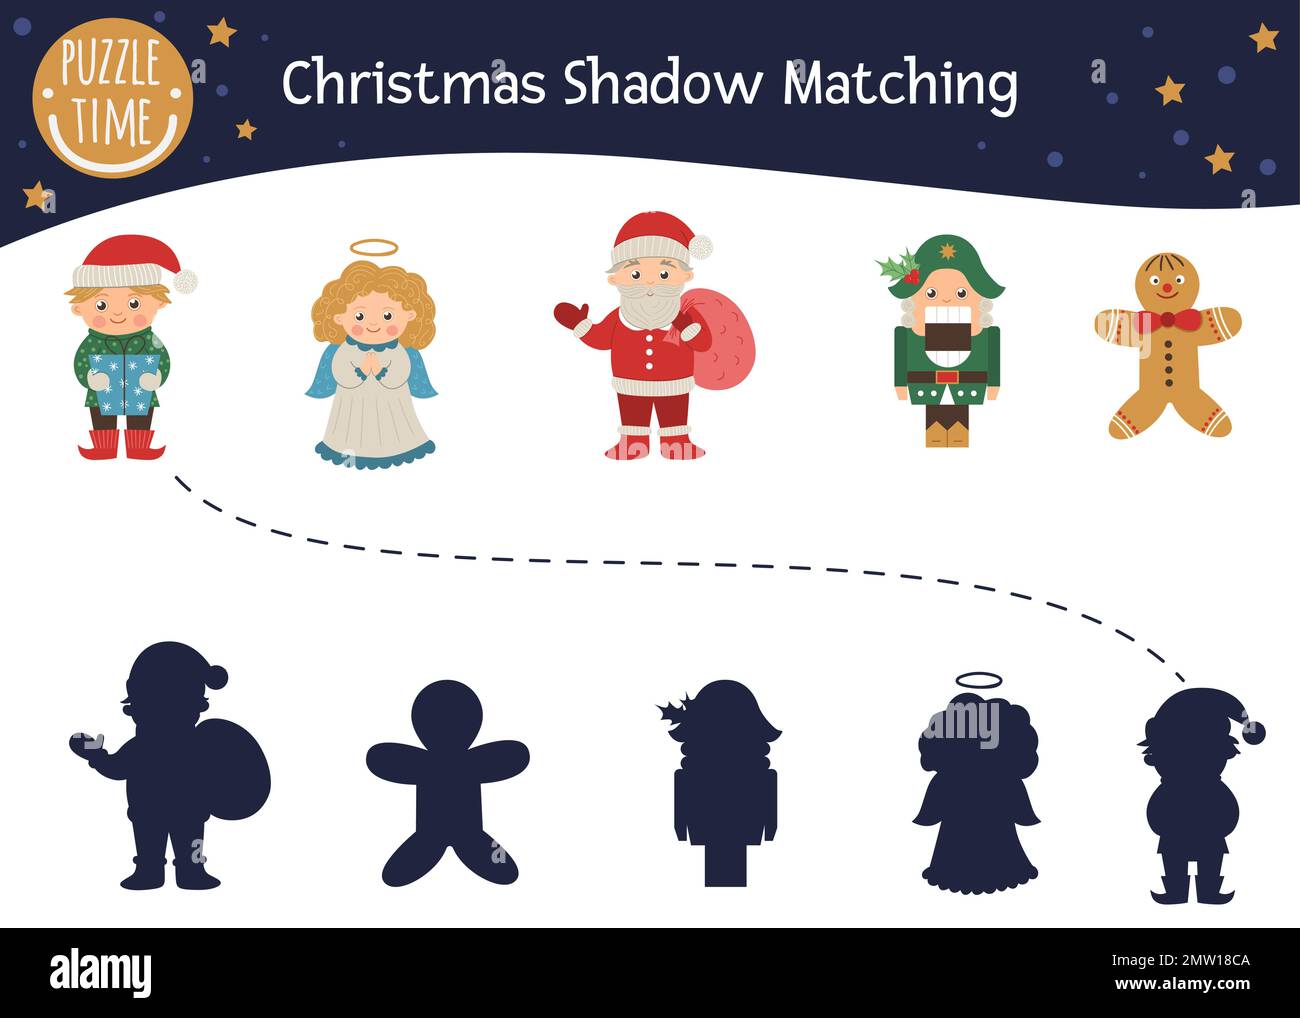 Christmas shadow matching activity for children with characters. Cute funny smiling Santa Claus, angel, elf, nutcracker, gingerbread man. Find the cor Stock Vector